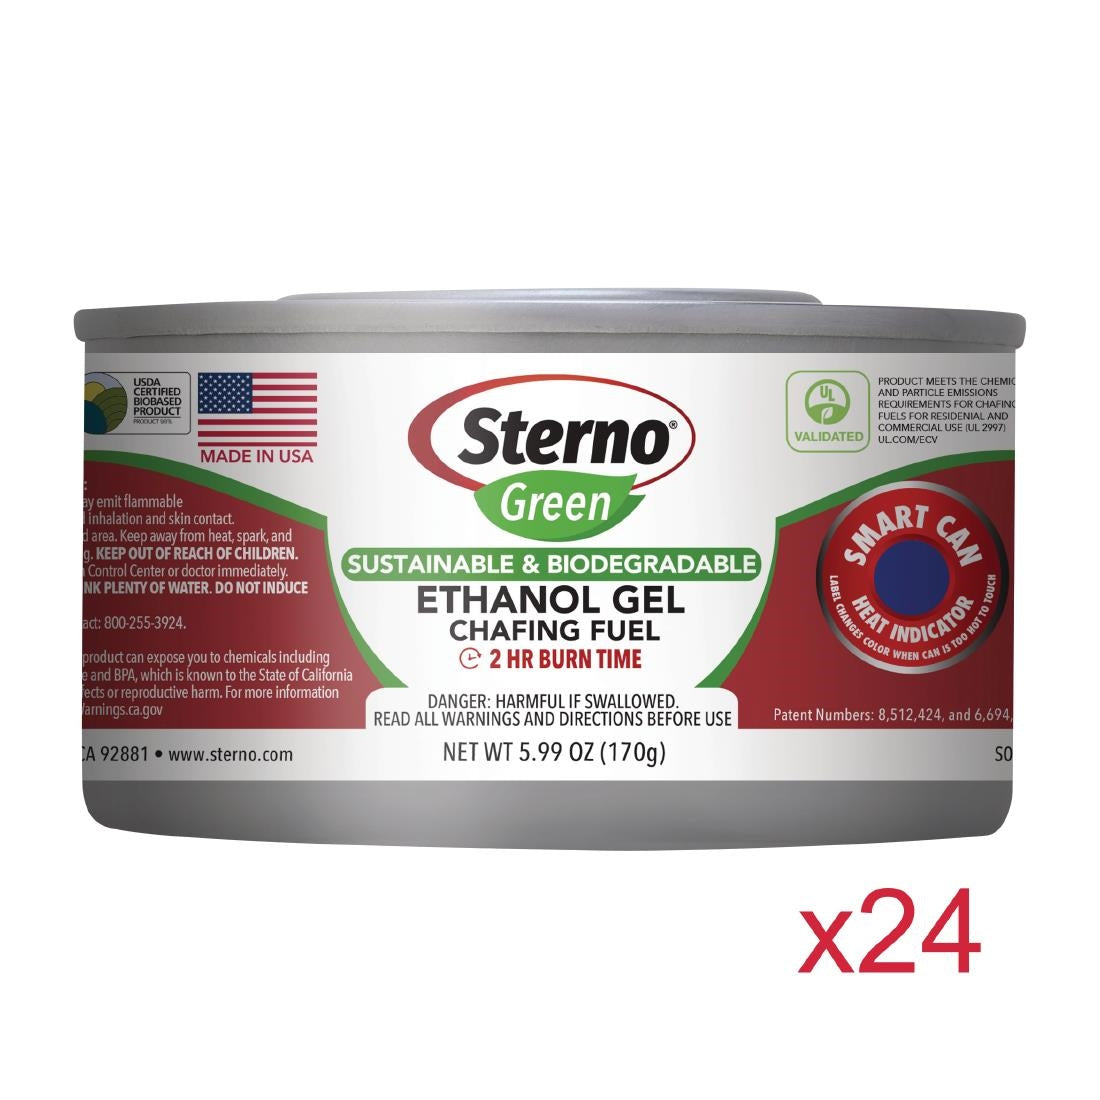 SA609 Sterno Green Ethanol Gel Chafing Fuel 2 Hour (Pack of 24)